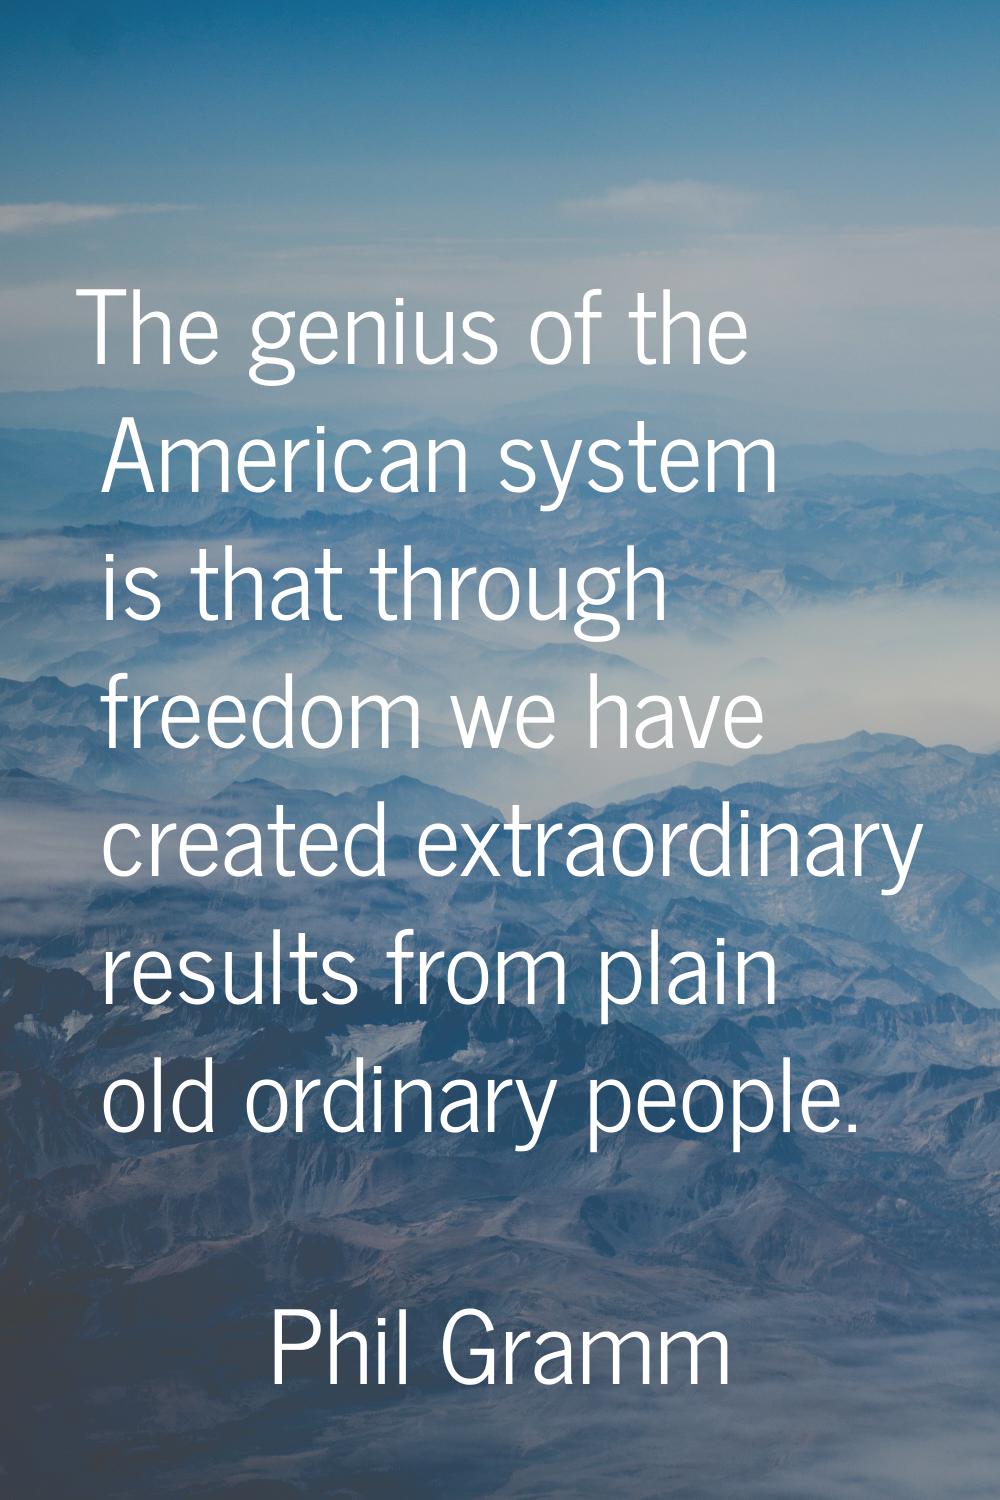 The genius of the American system is that through freedom we have created extraordinary results fro